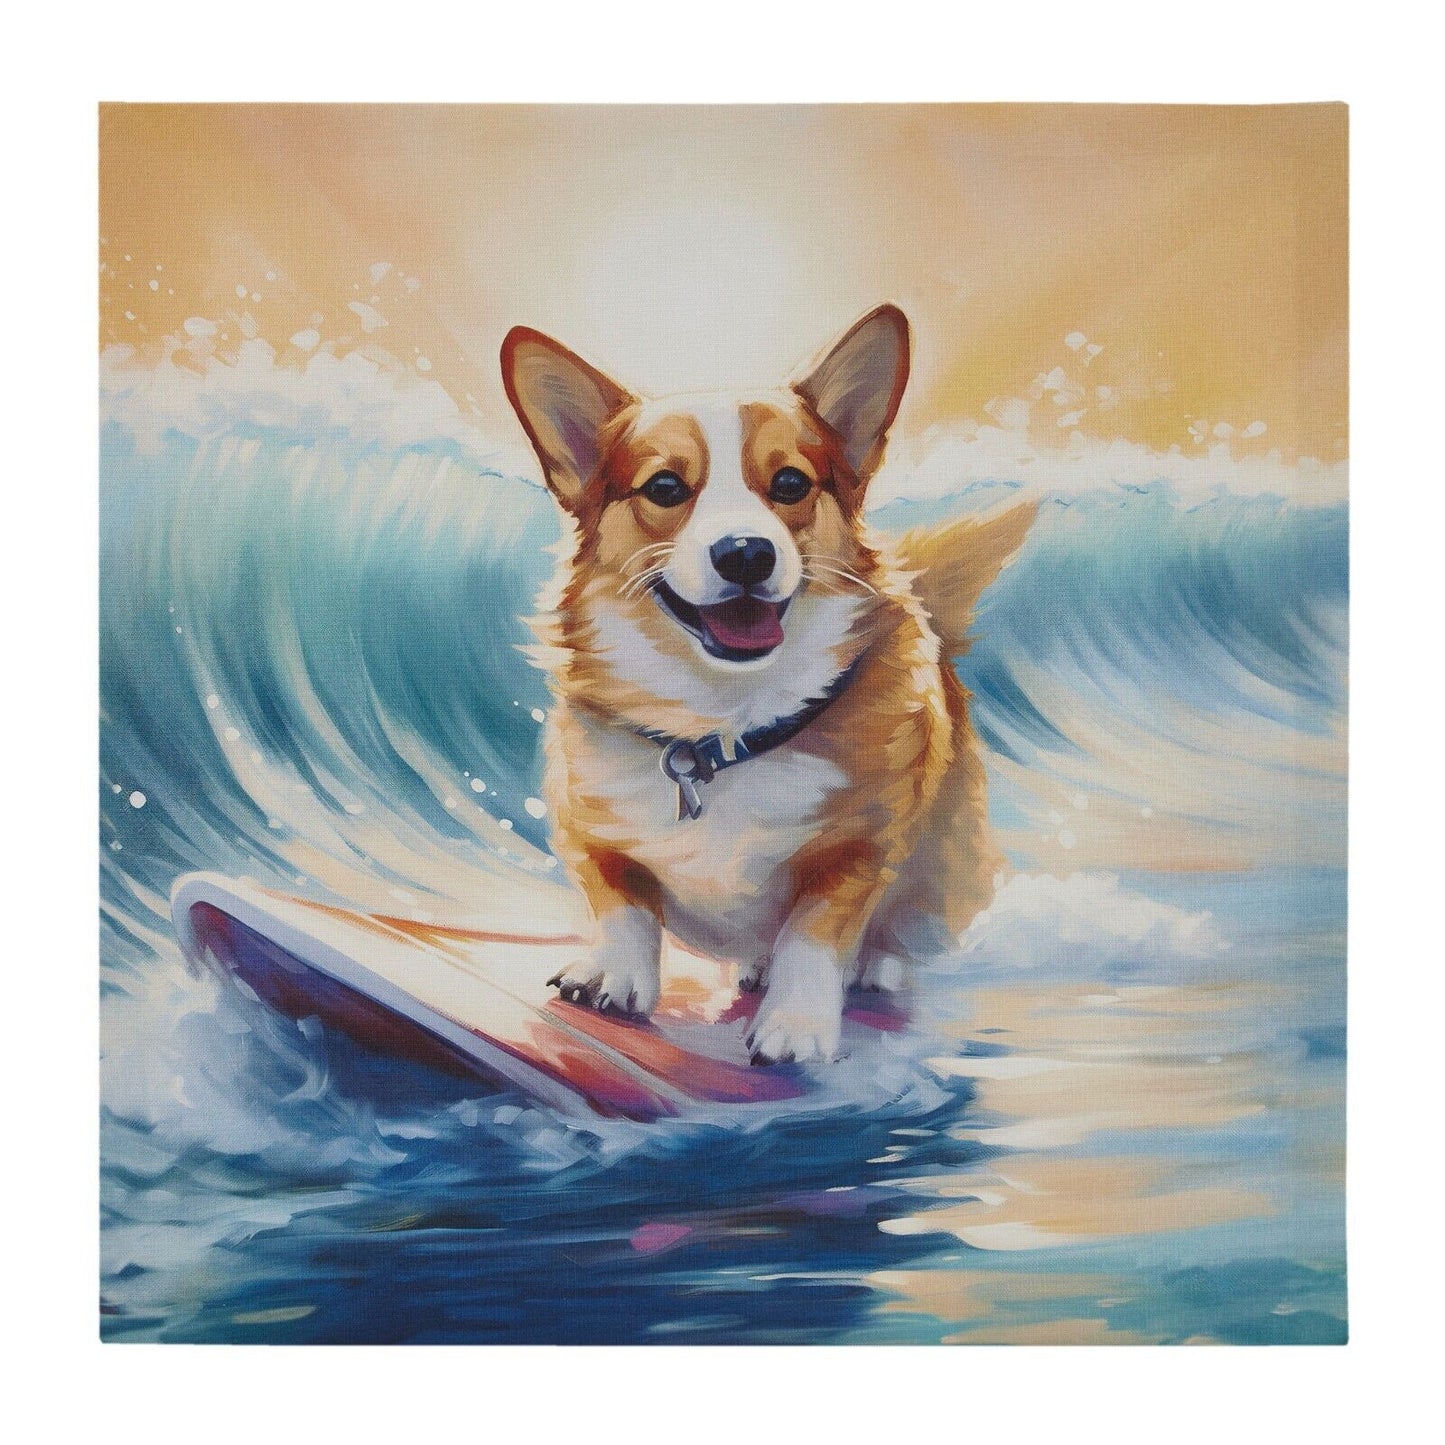 Animal Canvas Wall Art Living Room,Dog Home Decor Painting Picture for Bedroom